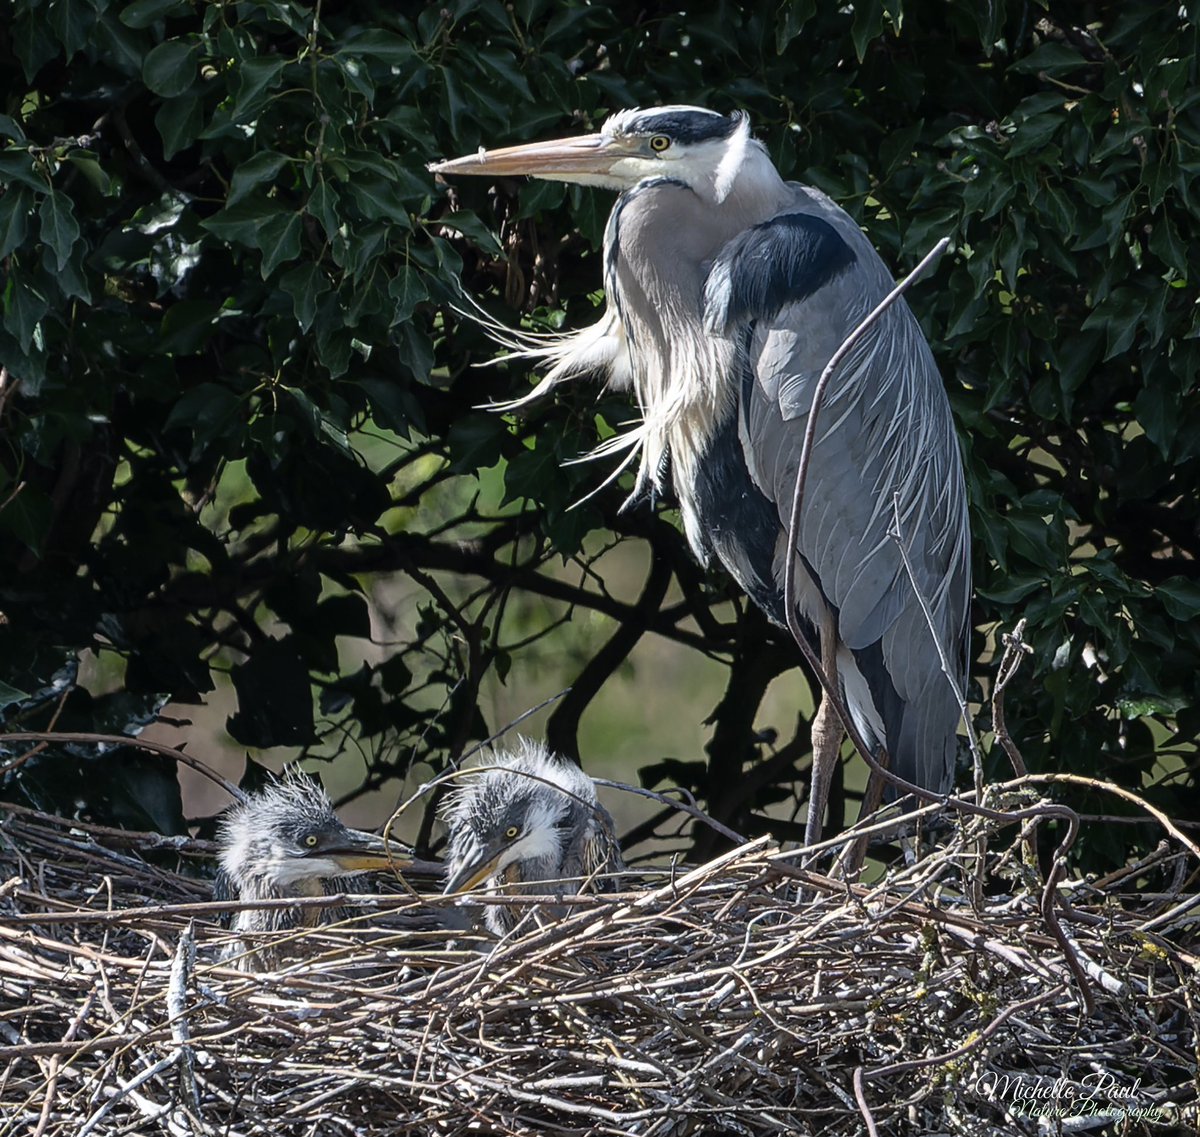 Mini dinosaurs or Grey Heron chicks? Either way they are so very cute and fluffy 😁🥰🩶